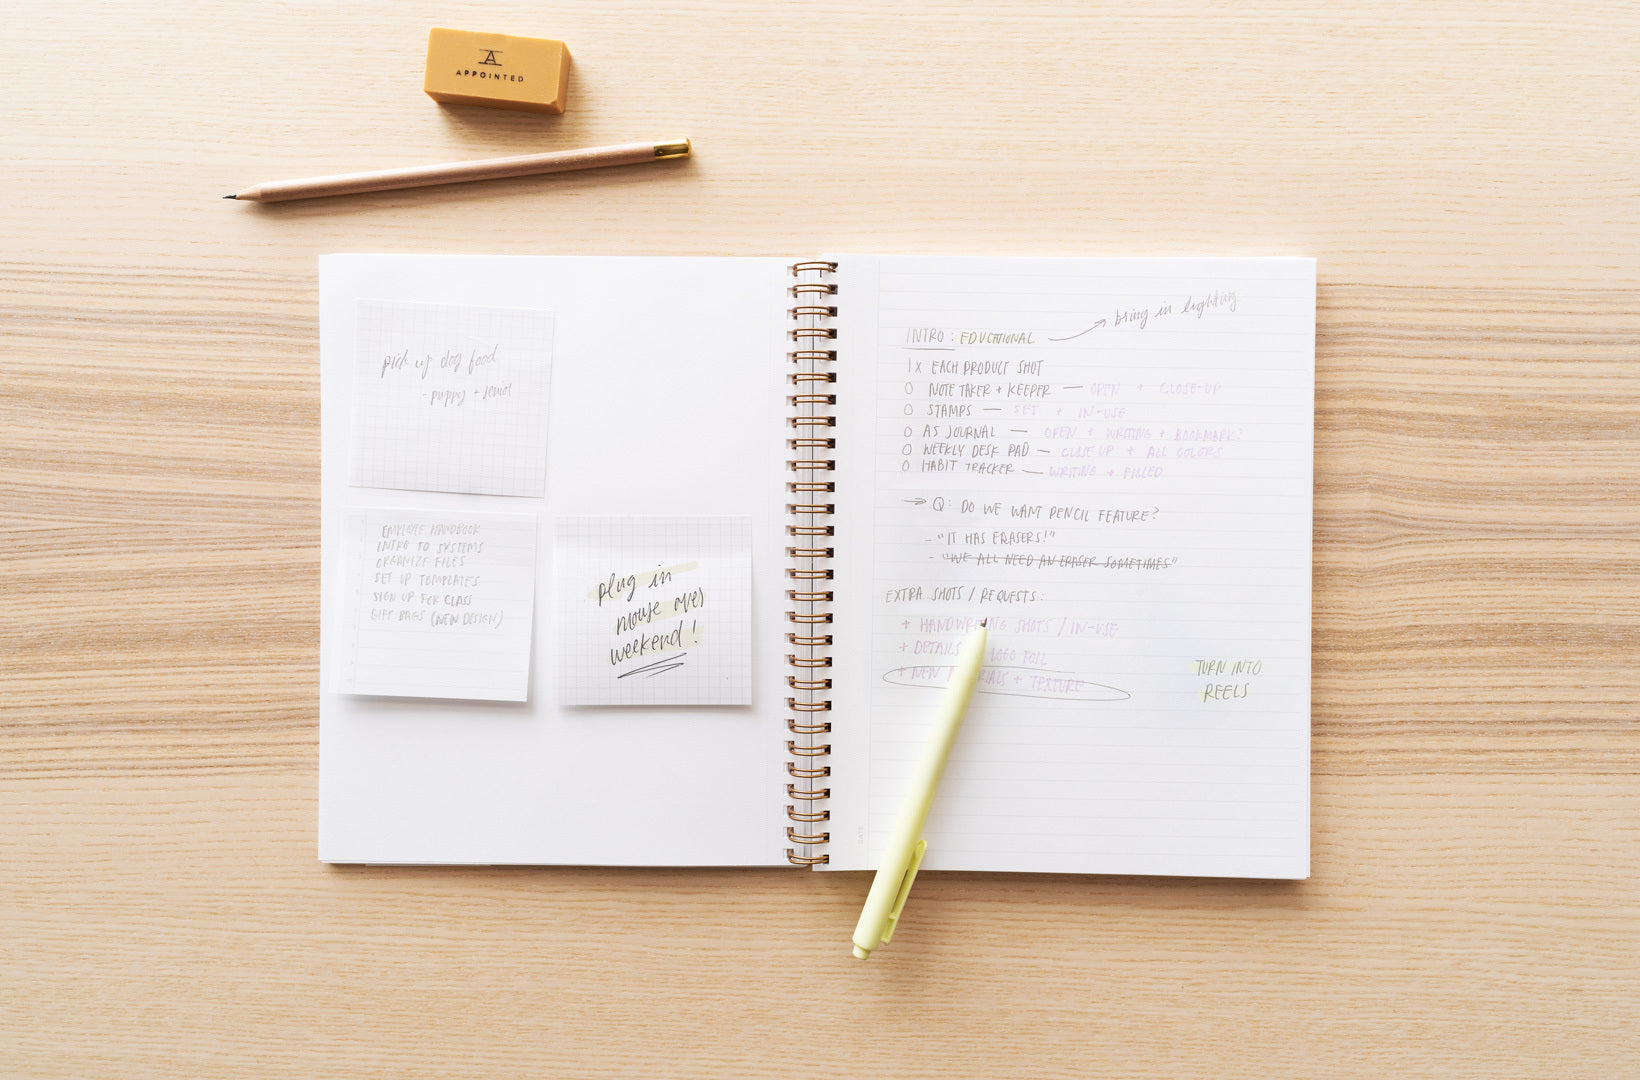 A notebook lies open on a wood desktop to show to do lists organized with adhesive notes and writing accessories alongside